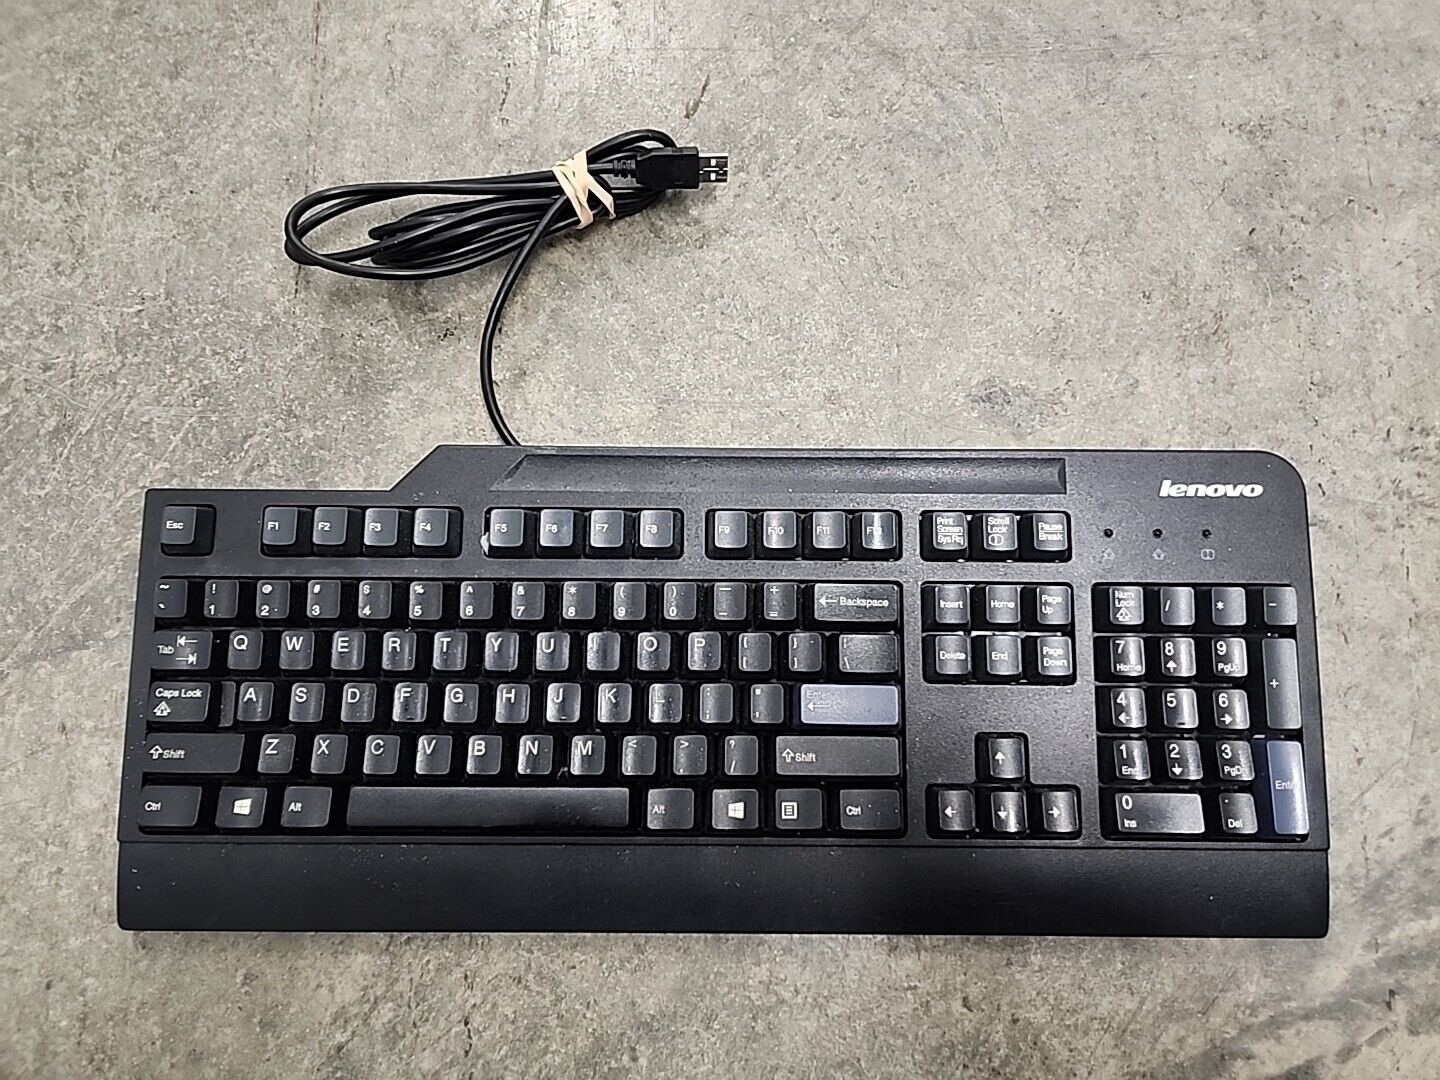 Lenovo SK-8825 41A5289 Wired Keyboard for PC (Back Feet Missing, Plz Rd Dsc)